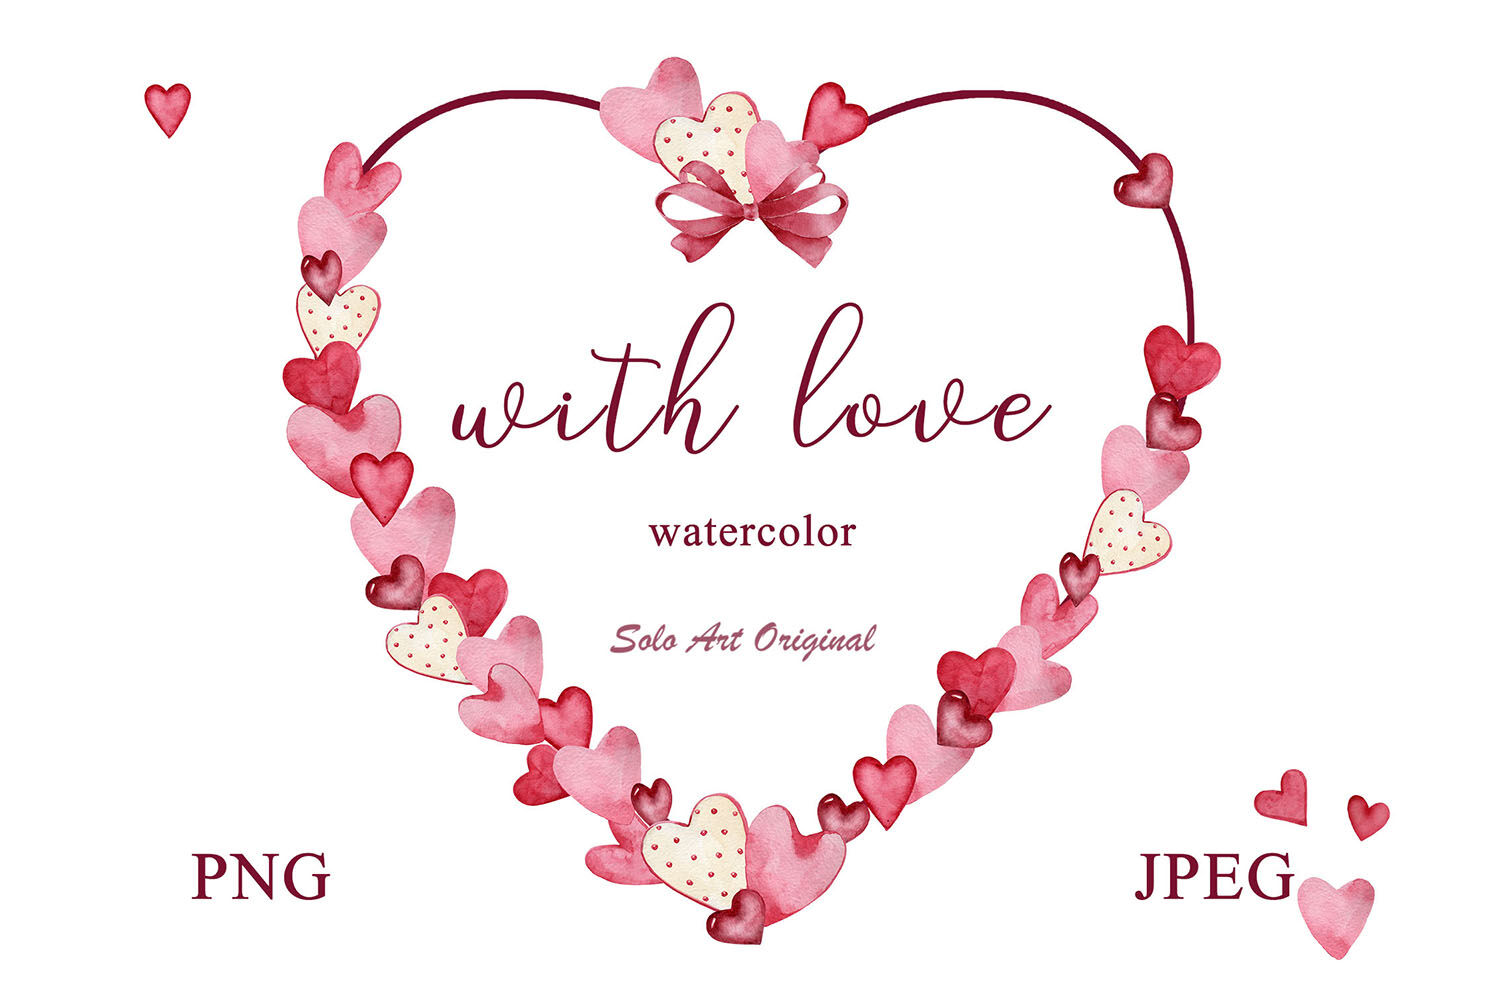 16 Watercolor Hearts Watercolor Clip Art, Digital Download, Commercial Use  PNG, Valentines Day Graphics, Invitation, Love, Watercolor 